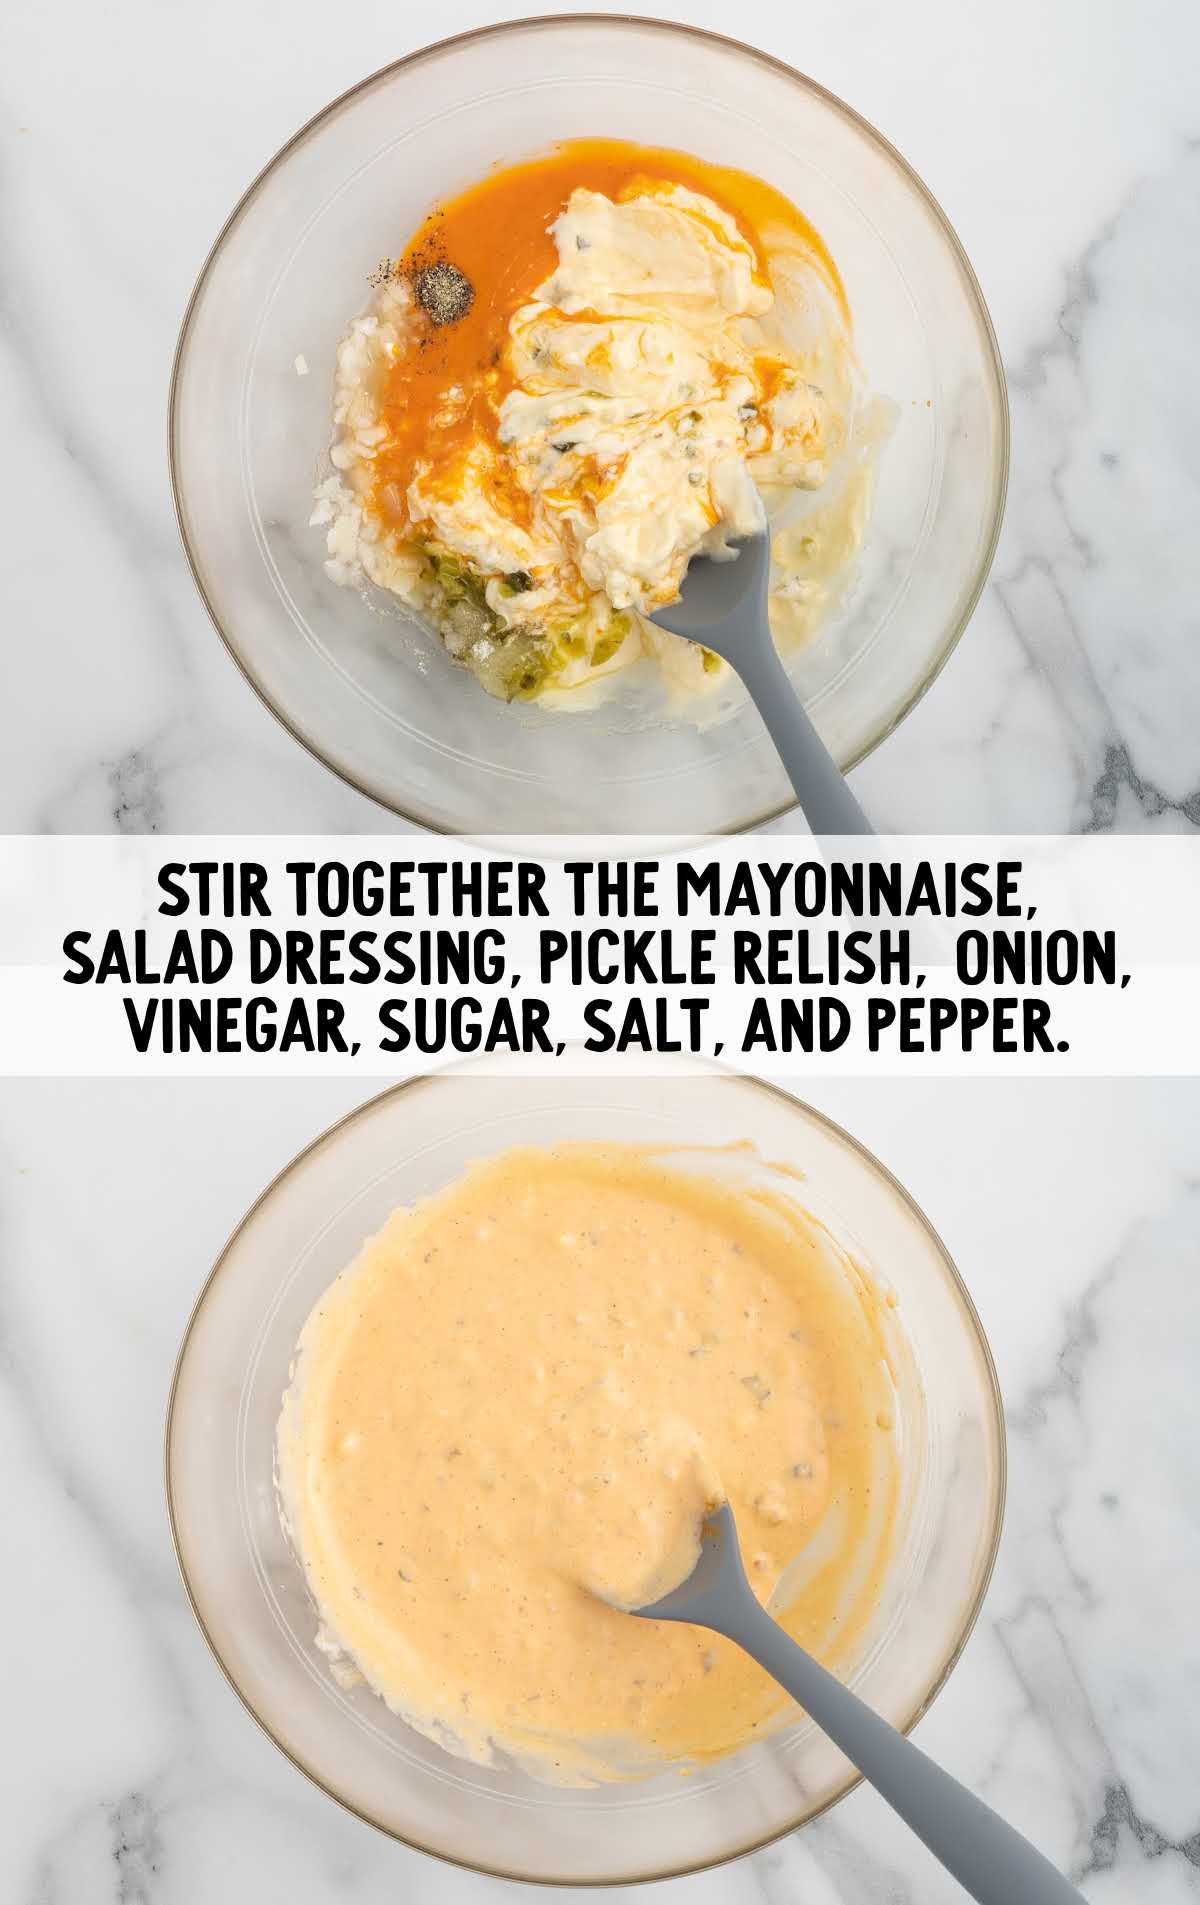 mayonnaise, bottled French salad dressing, sweet pickle relish, finely minced white onion, apple cider vinegar, granulated sugar, salt, and black pepper combined in a bowl